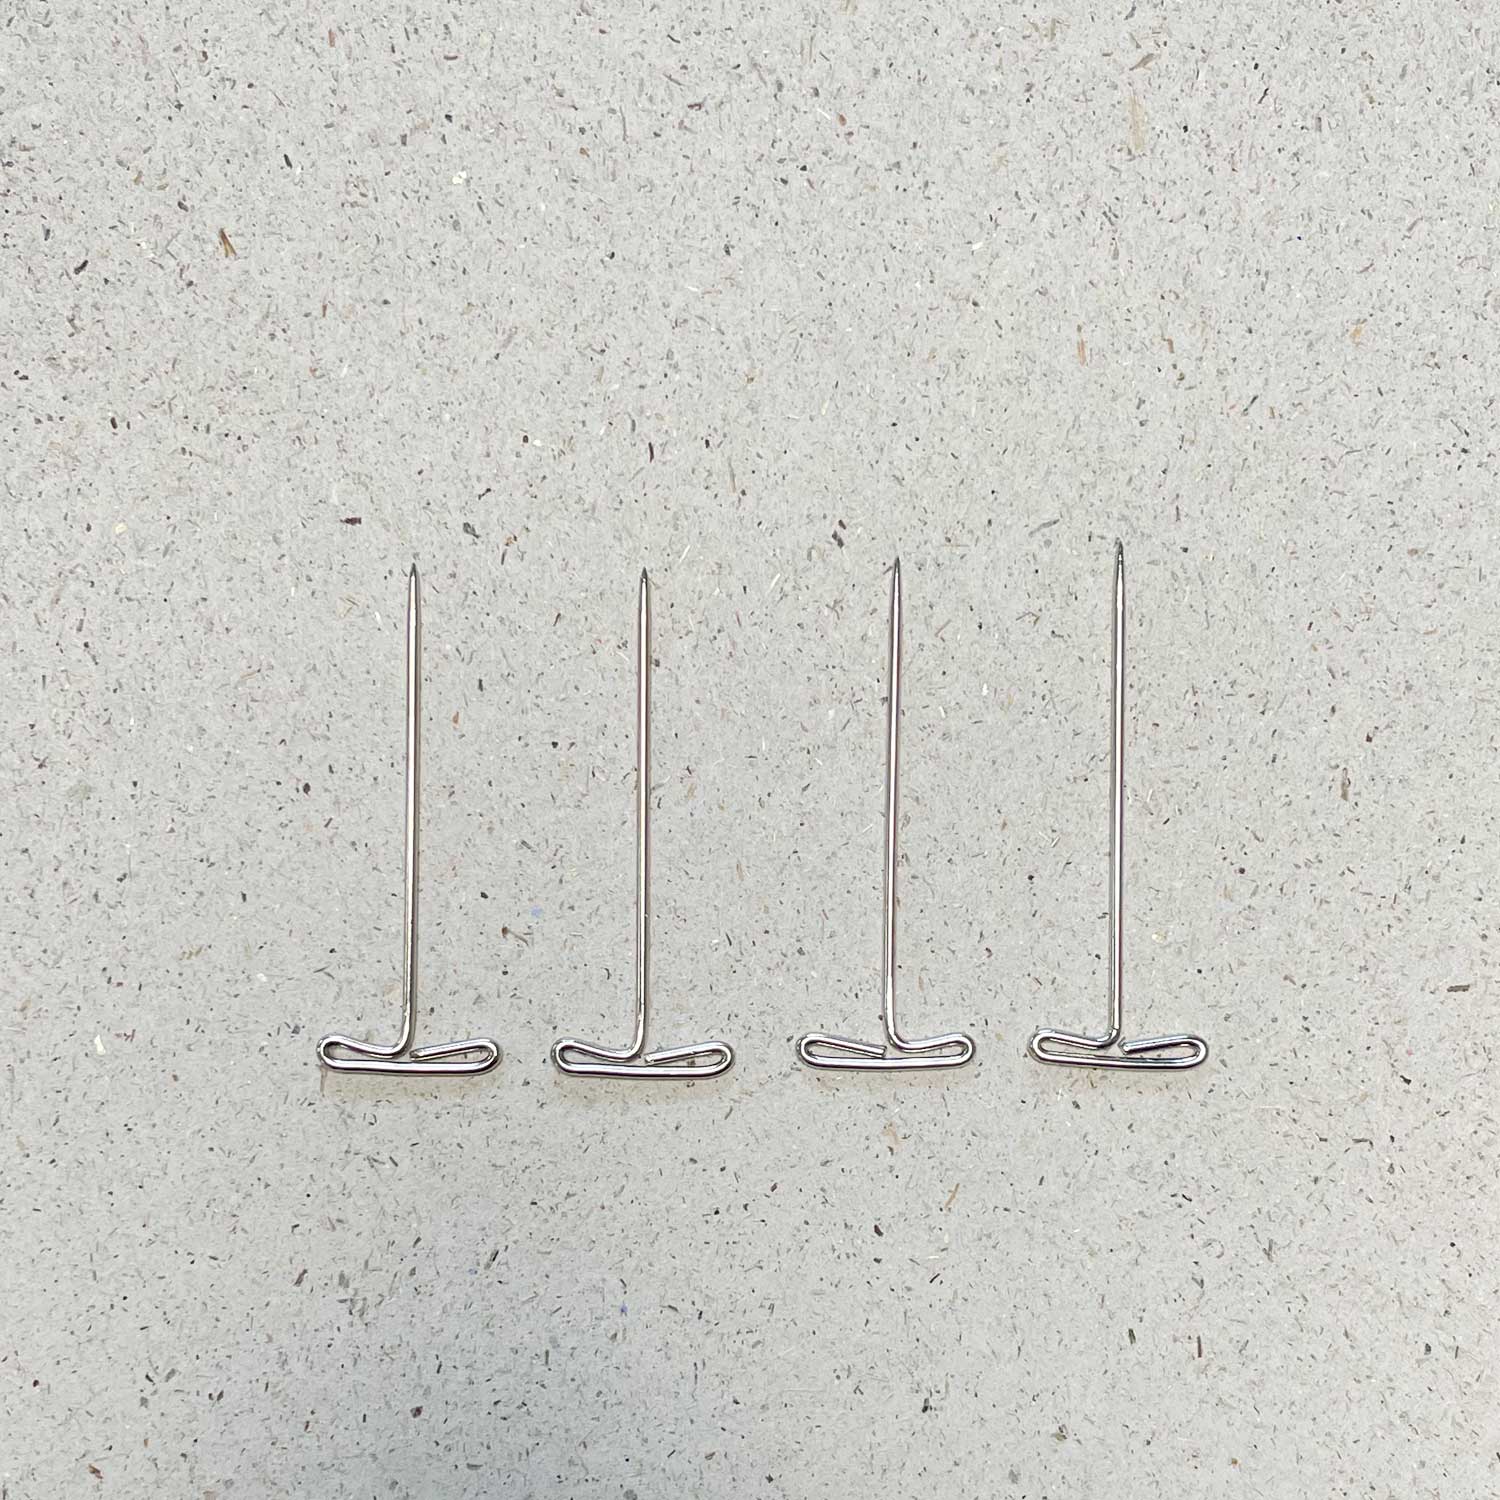 T-PINS FOR BLOCKING LACE GARMENTS